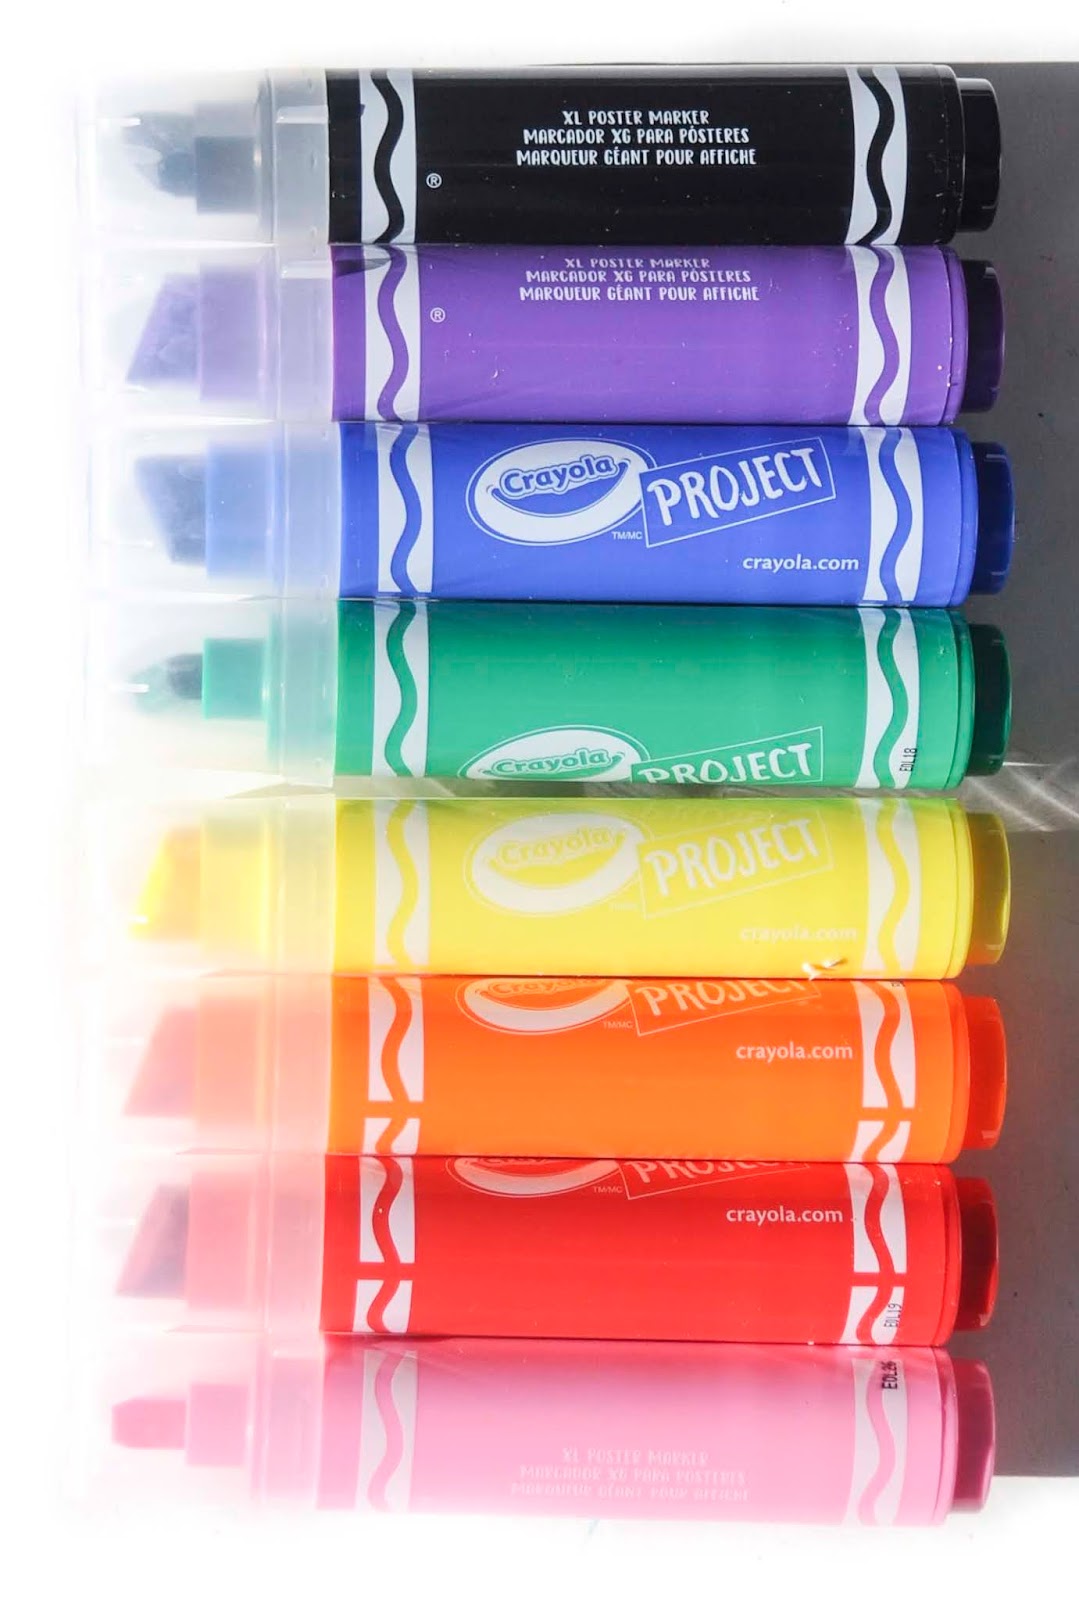 Crayola Project XL Poster Markers 4 Classic Colors Per Pack 3